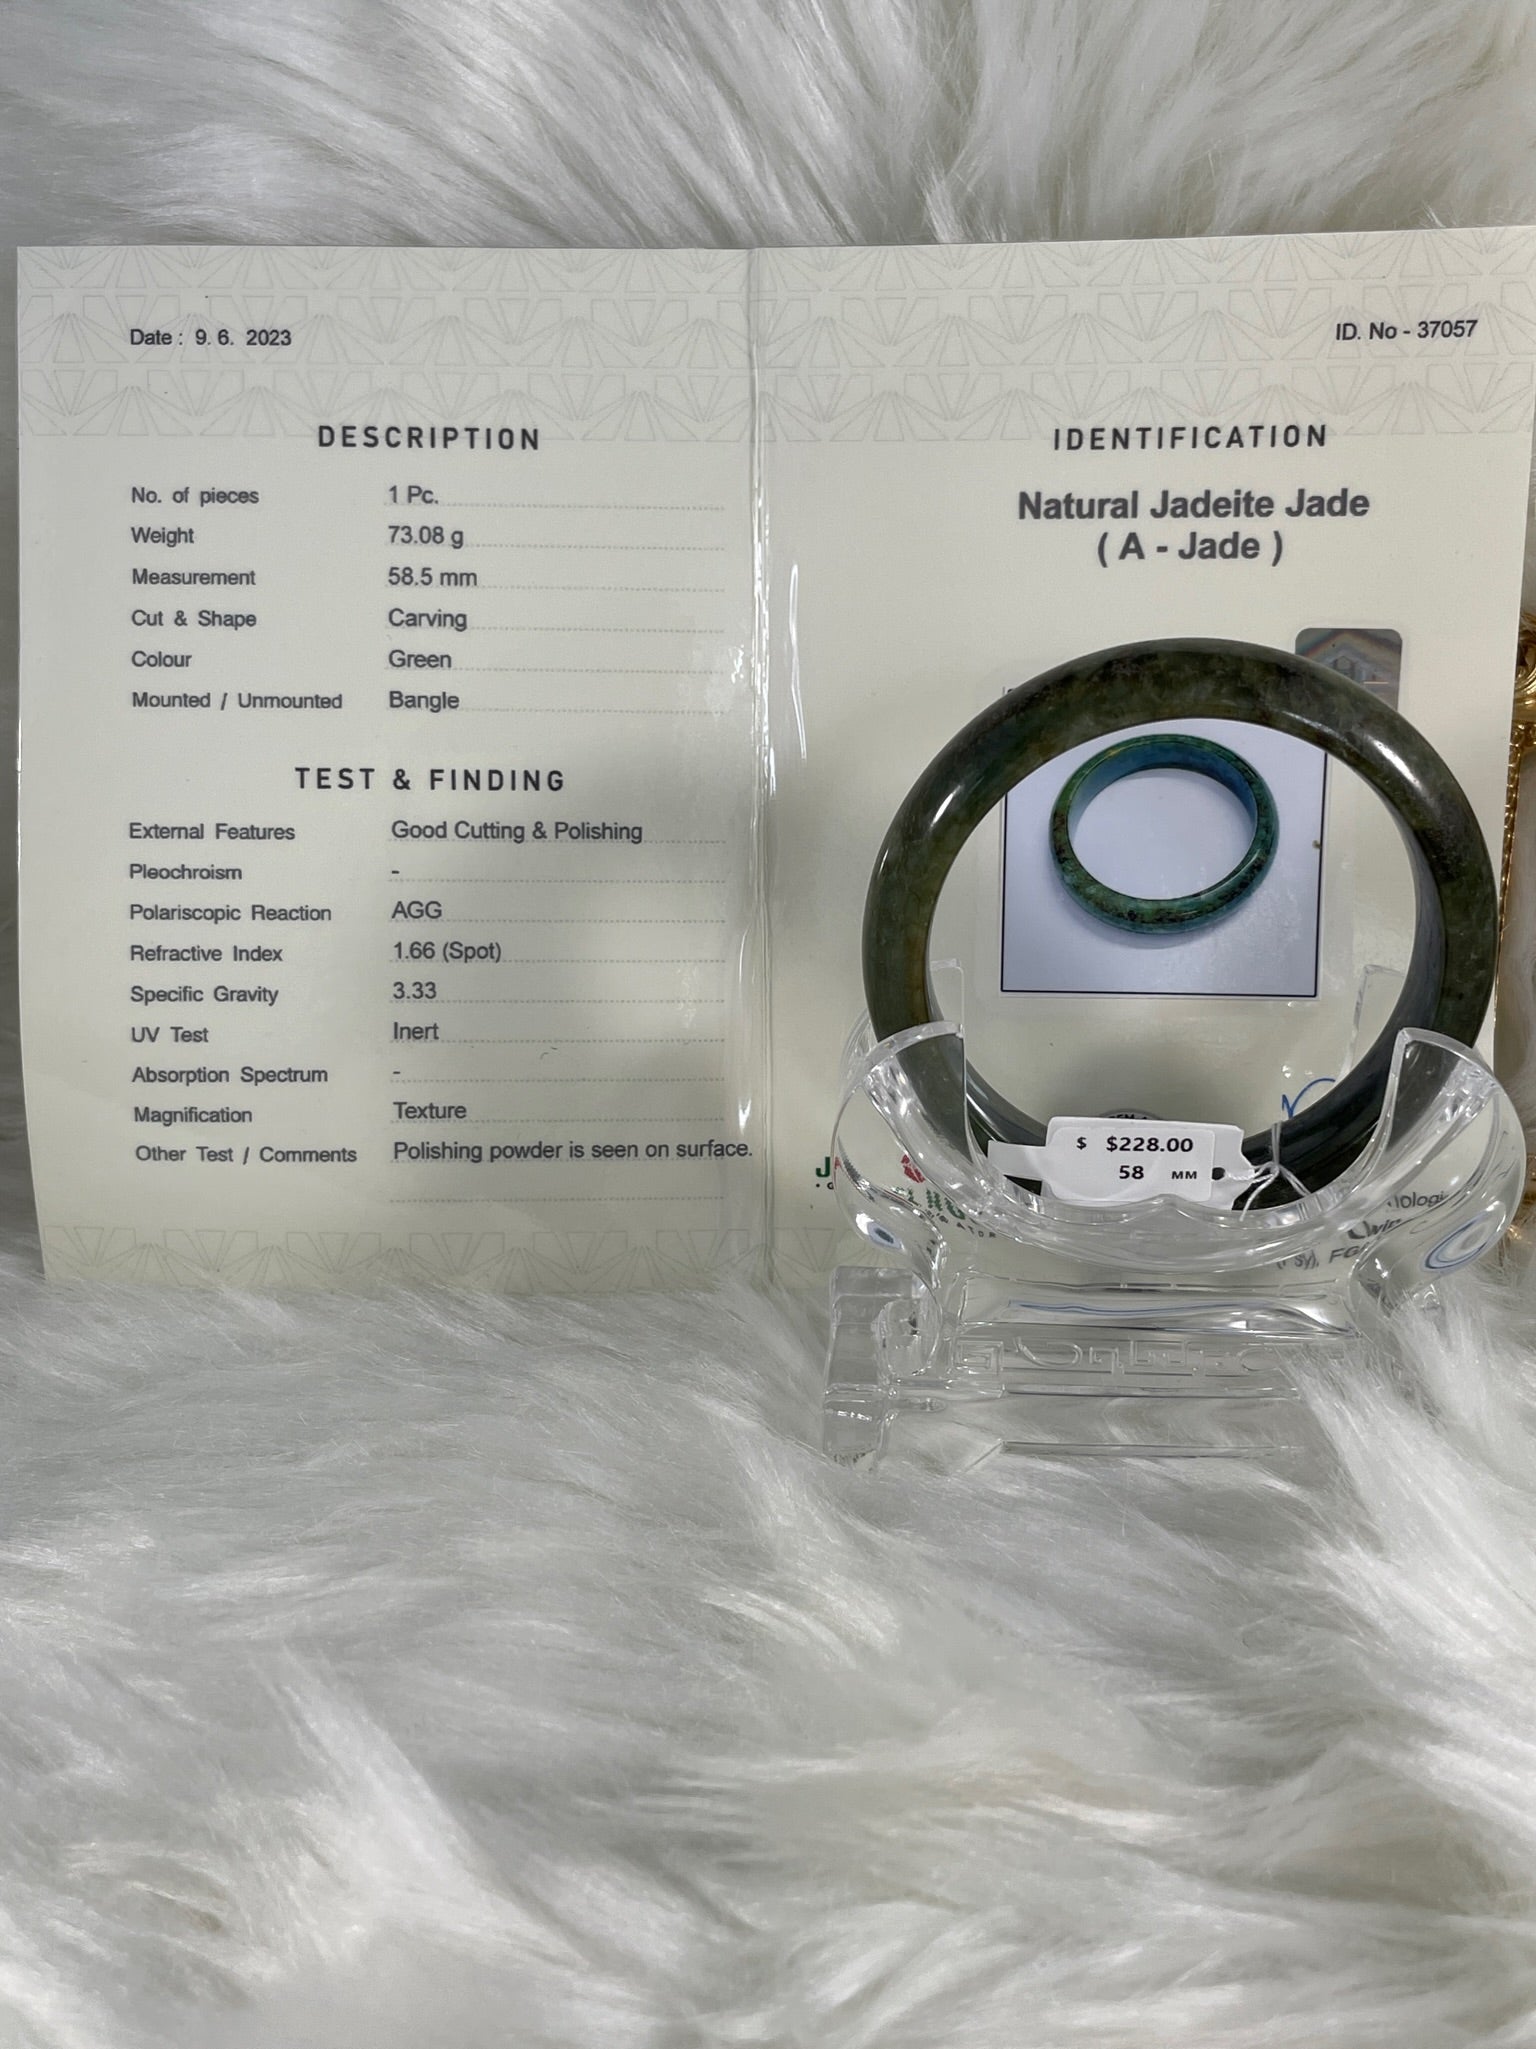 Grade A Natural Jade Bangle with certificate #37057